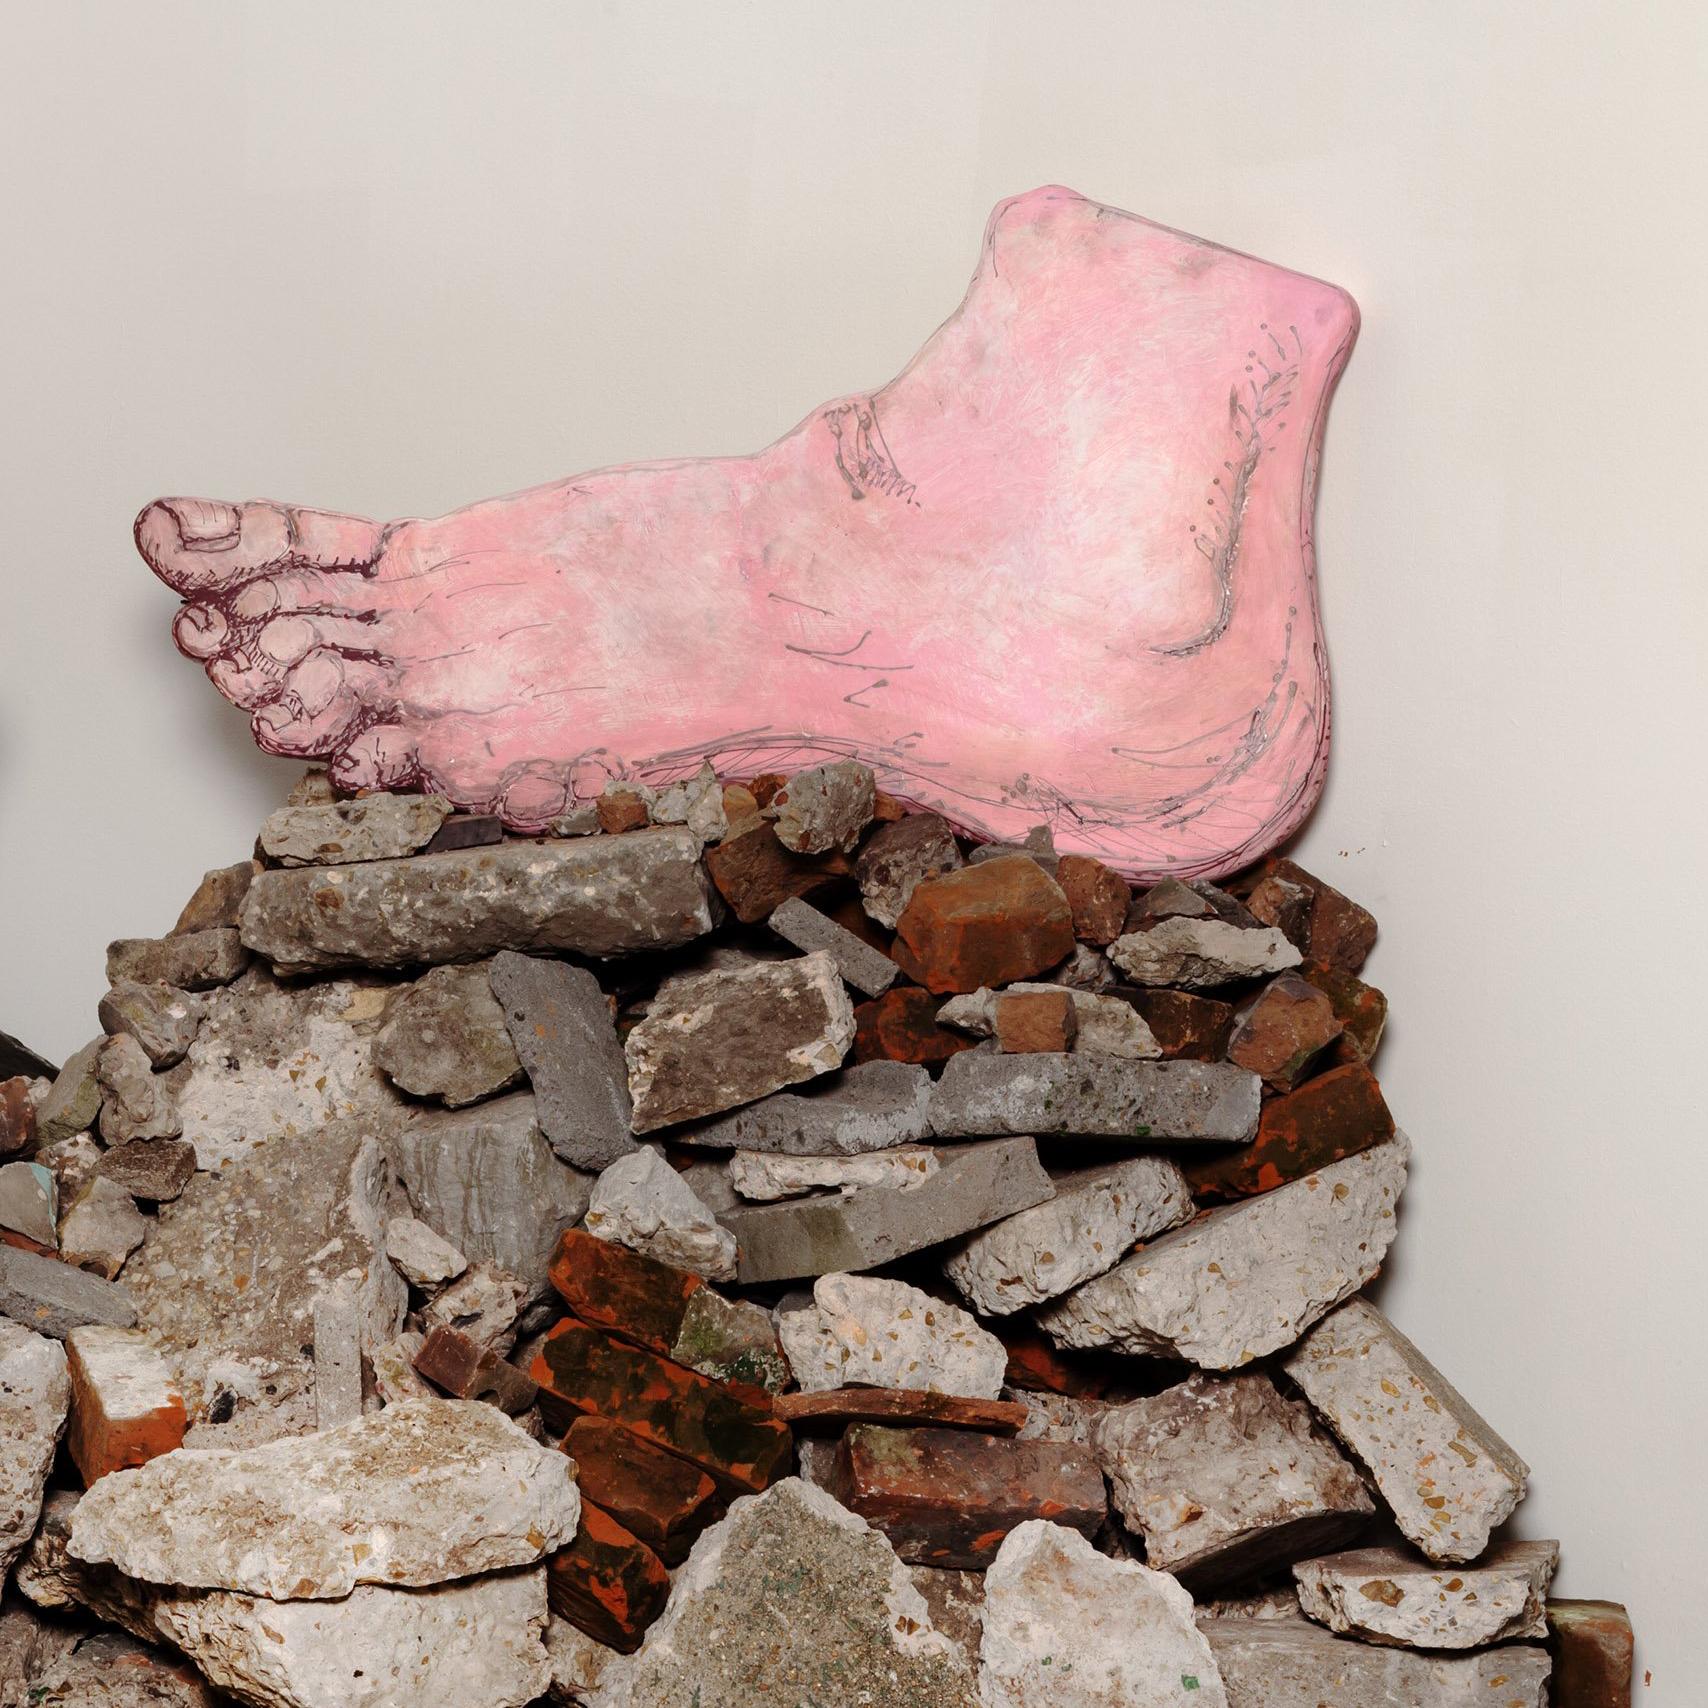 medium: acrylic on wood, rubble
23 x 40 inches each
installation dimensions variable: 53 x 91 inches

Gina Phillips is a mixed media, narrative artist who grew up in Kentucky and has lived in New Orleans since 1995. The imagery, stories and